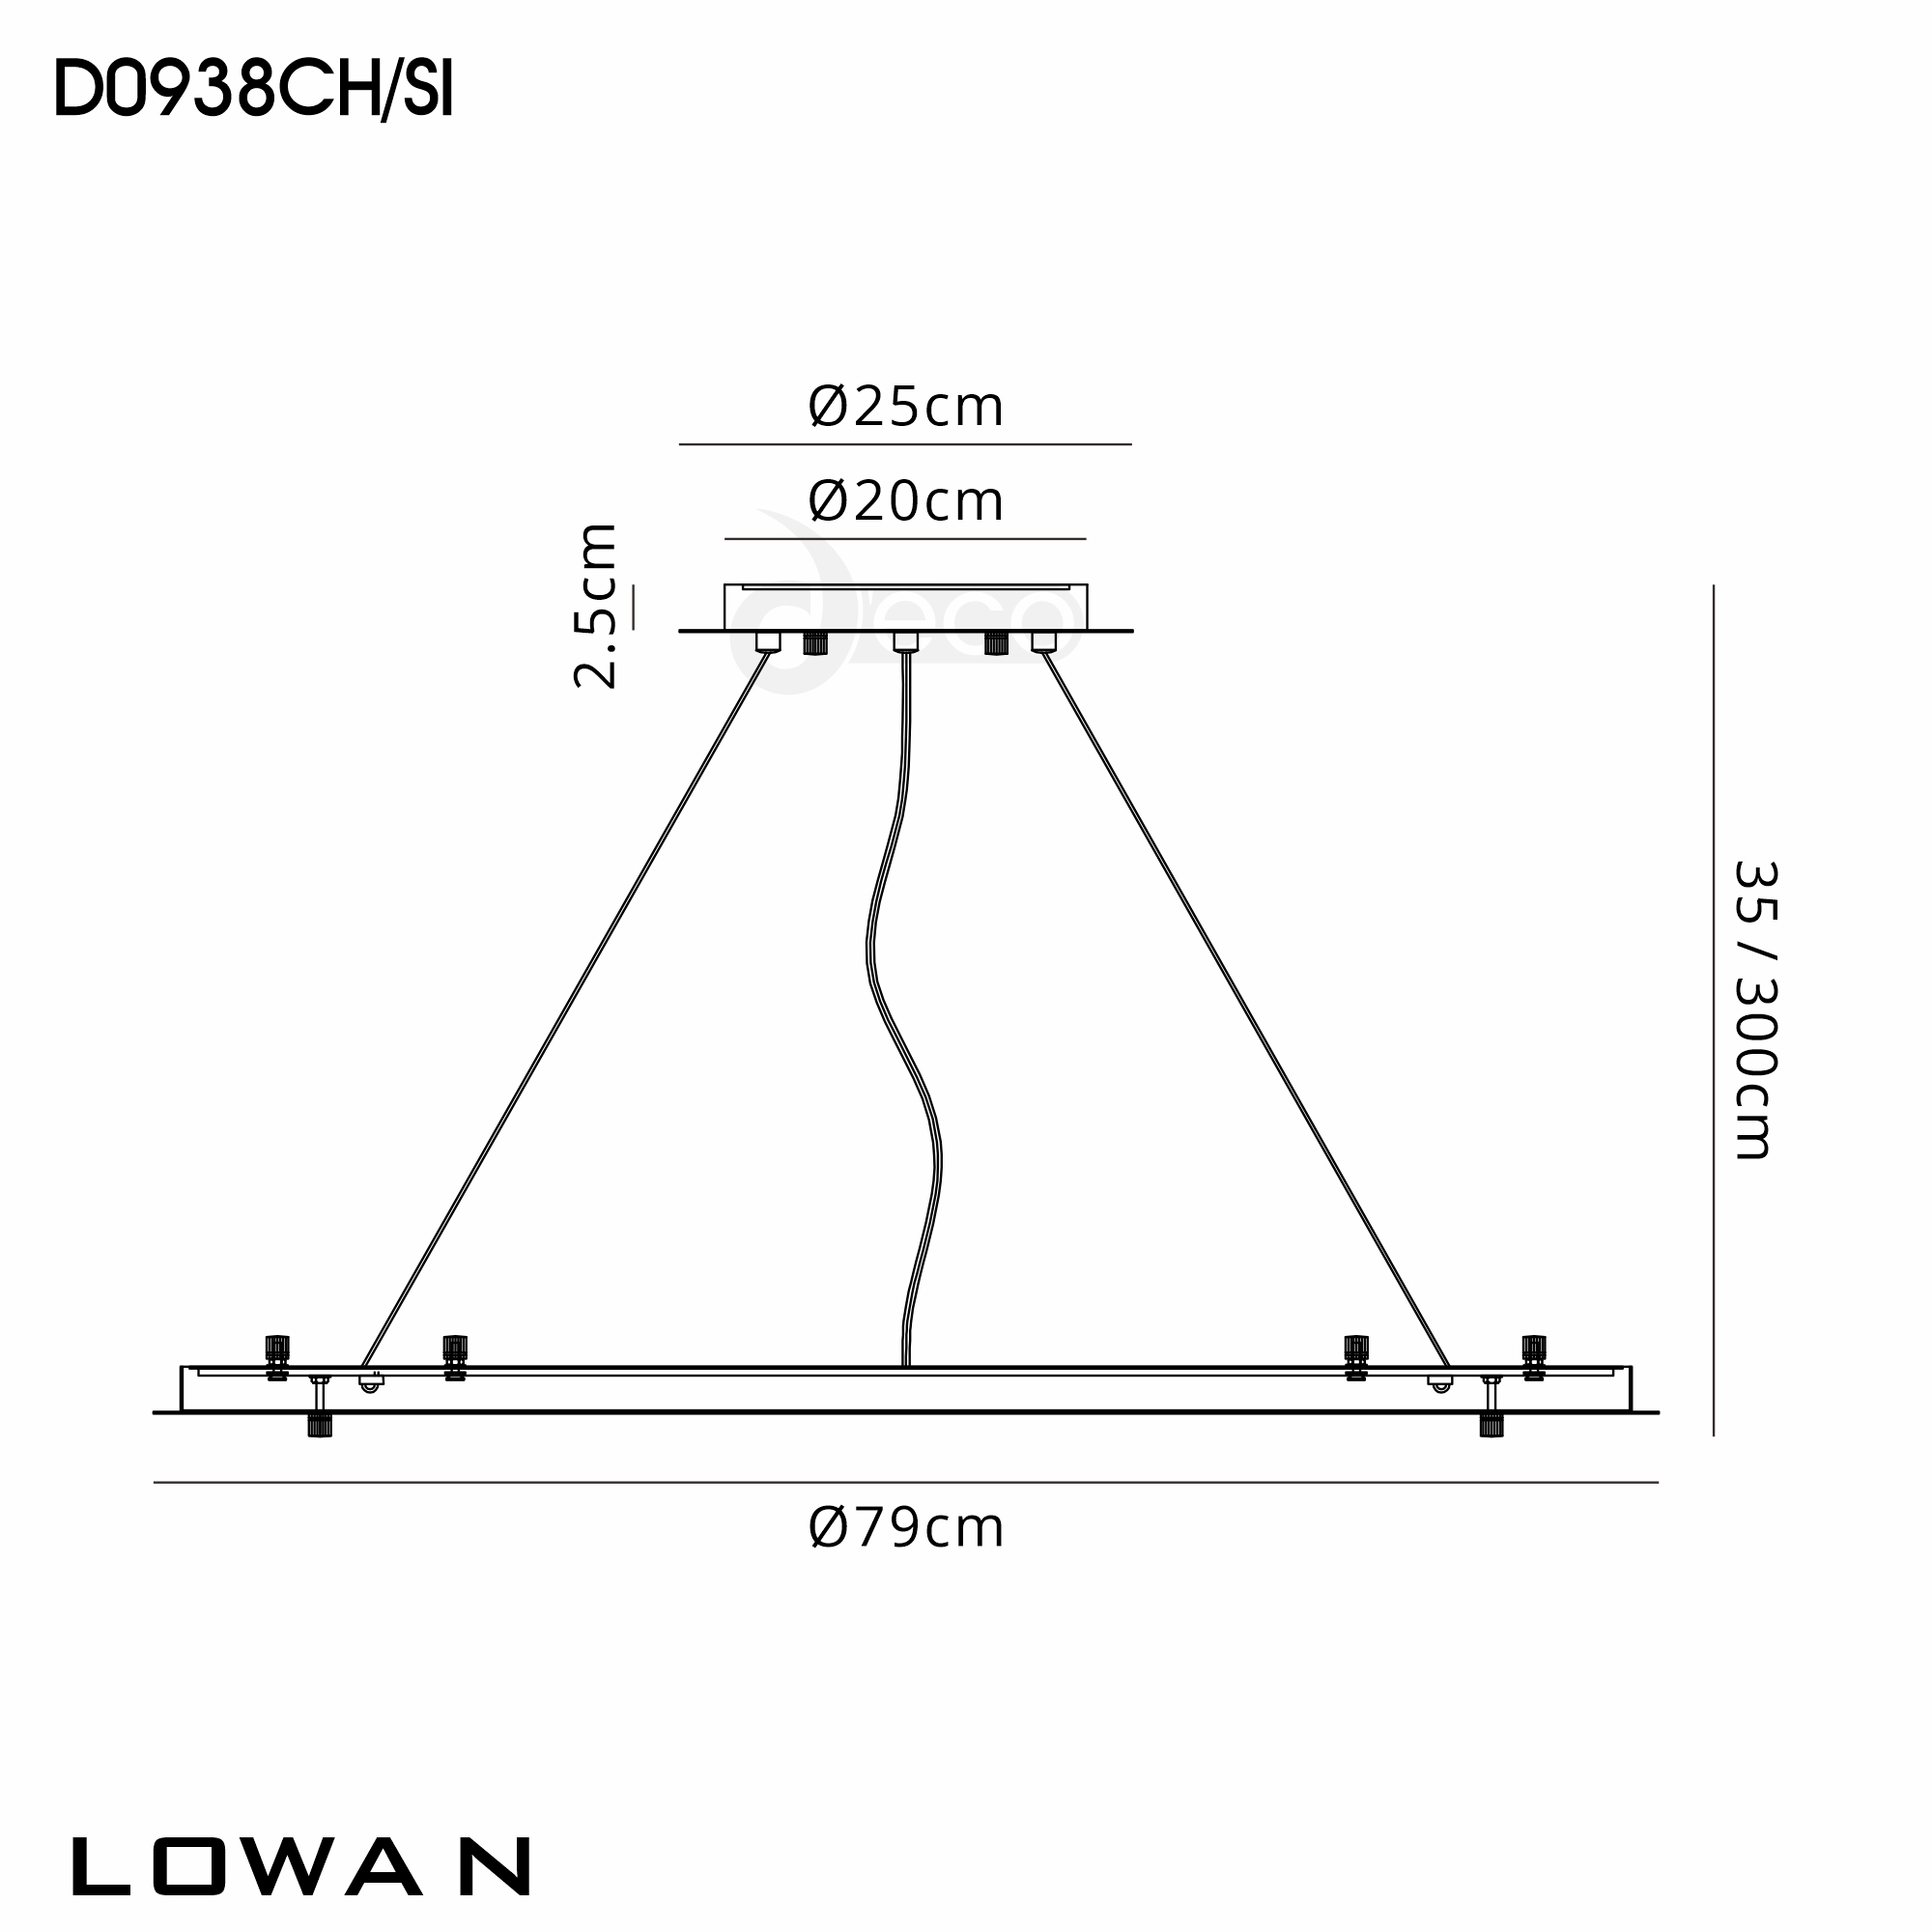 D0938CH/SI  Lowan 790mm, 3m Suspension Plate c/w Power Cable To Lower Flush Fittings, Polished Chrome/Silver Max Load 40kg (ONLY TESTED FOR OUR RANGE OF PRODUCTS)